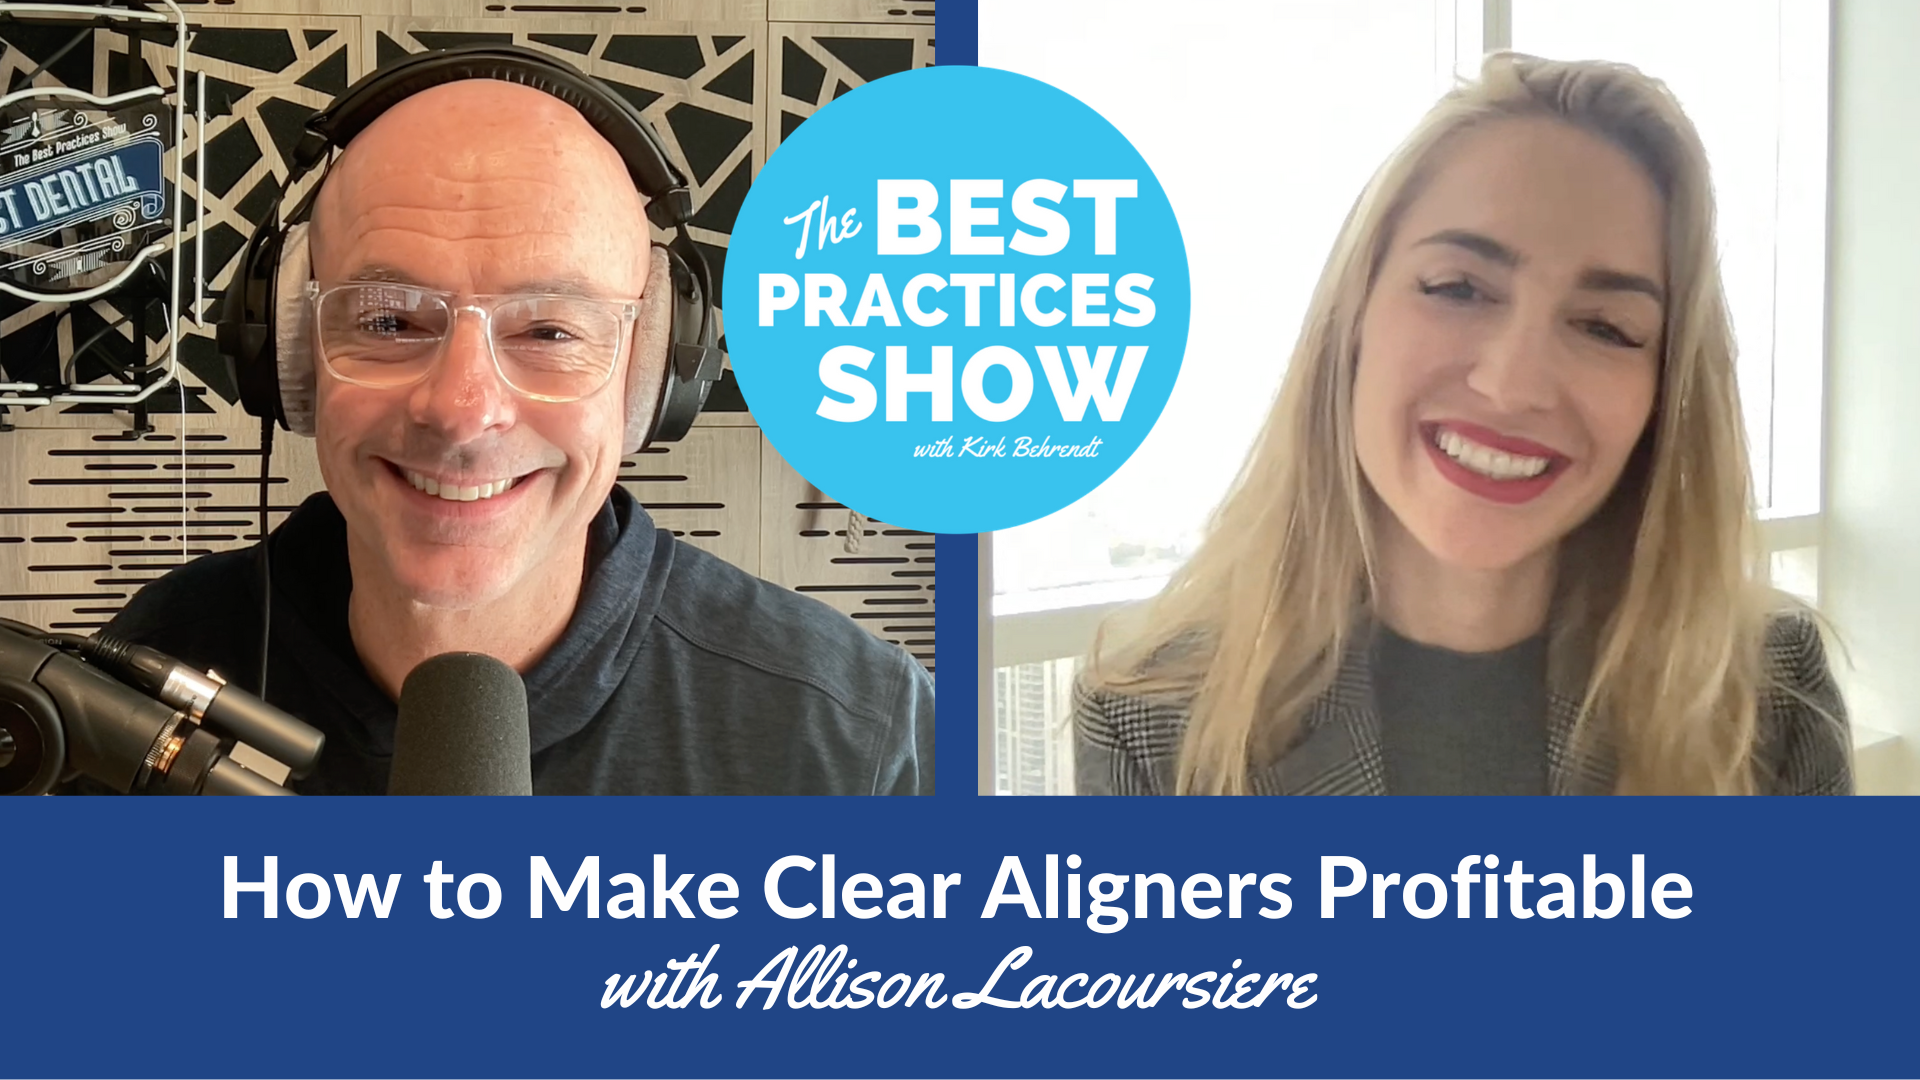 Learn How to Make Clear Aligners Profitable with Allison LaCoursiere on Episode 663 of The Best Practices Show!